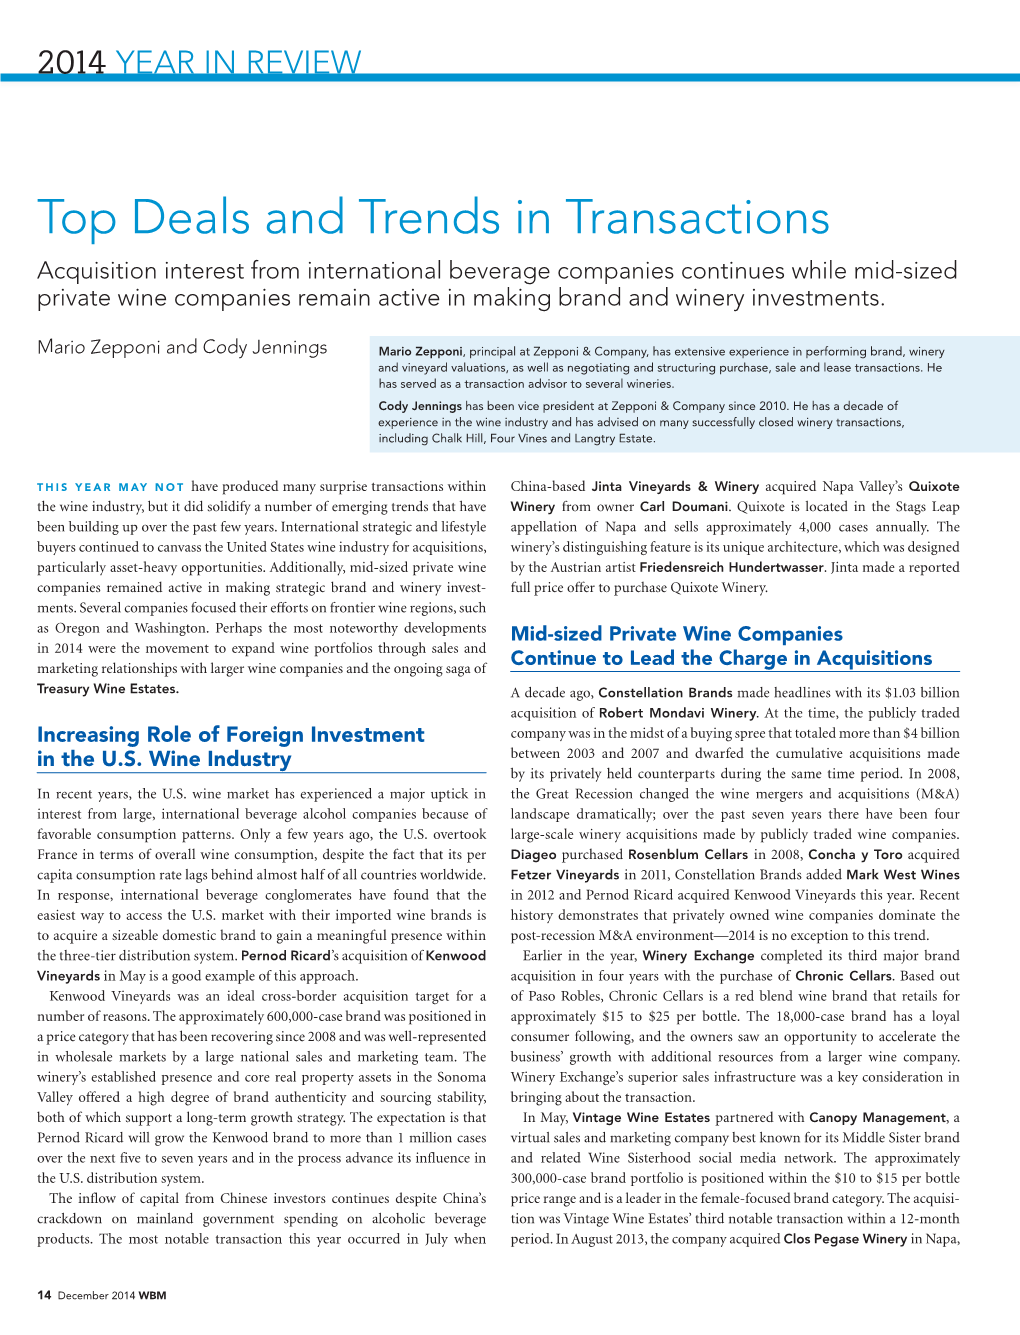 Top Deals and Trends in Transactions